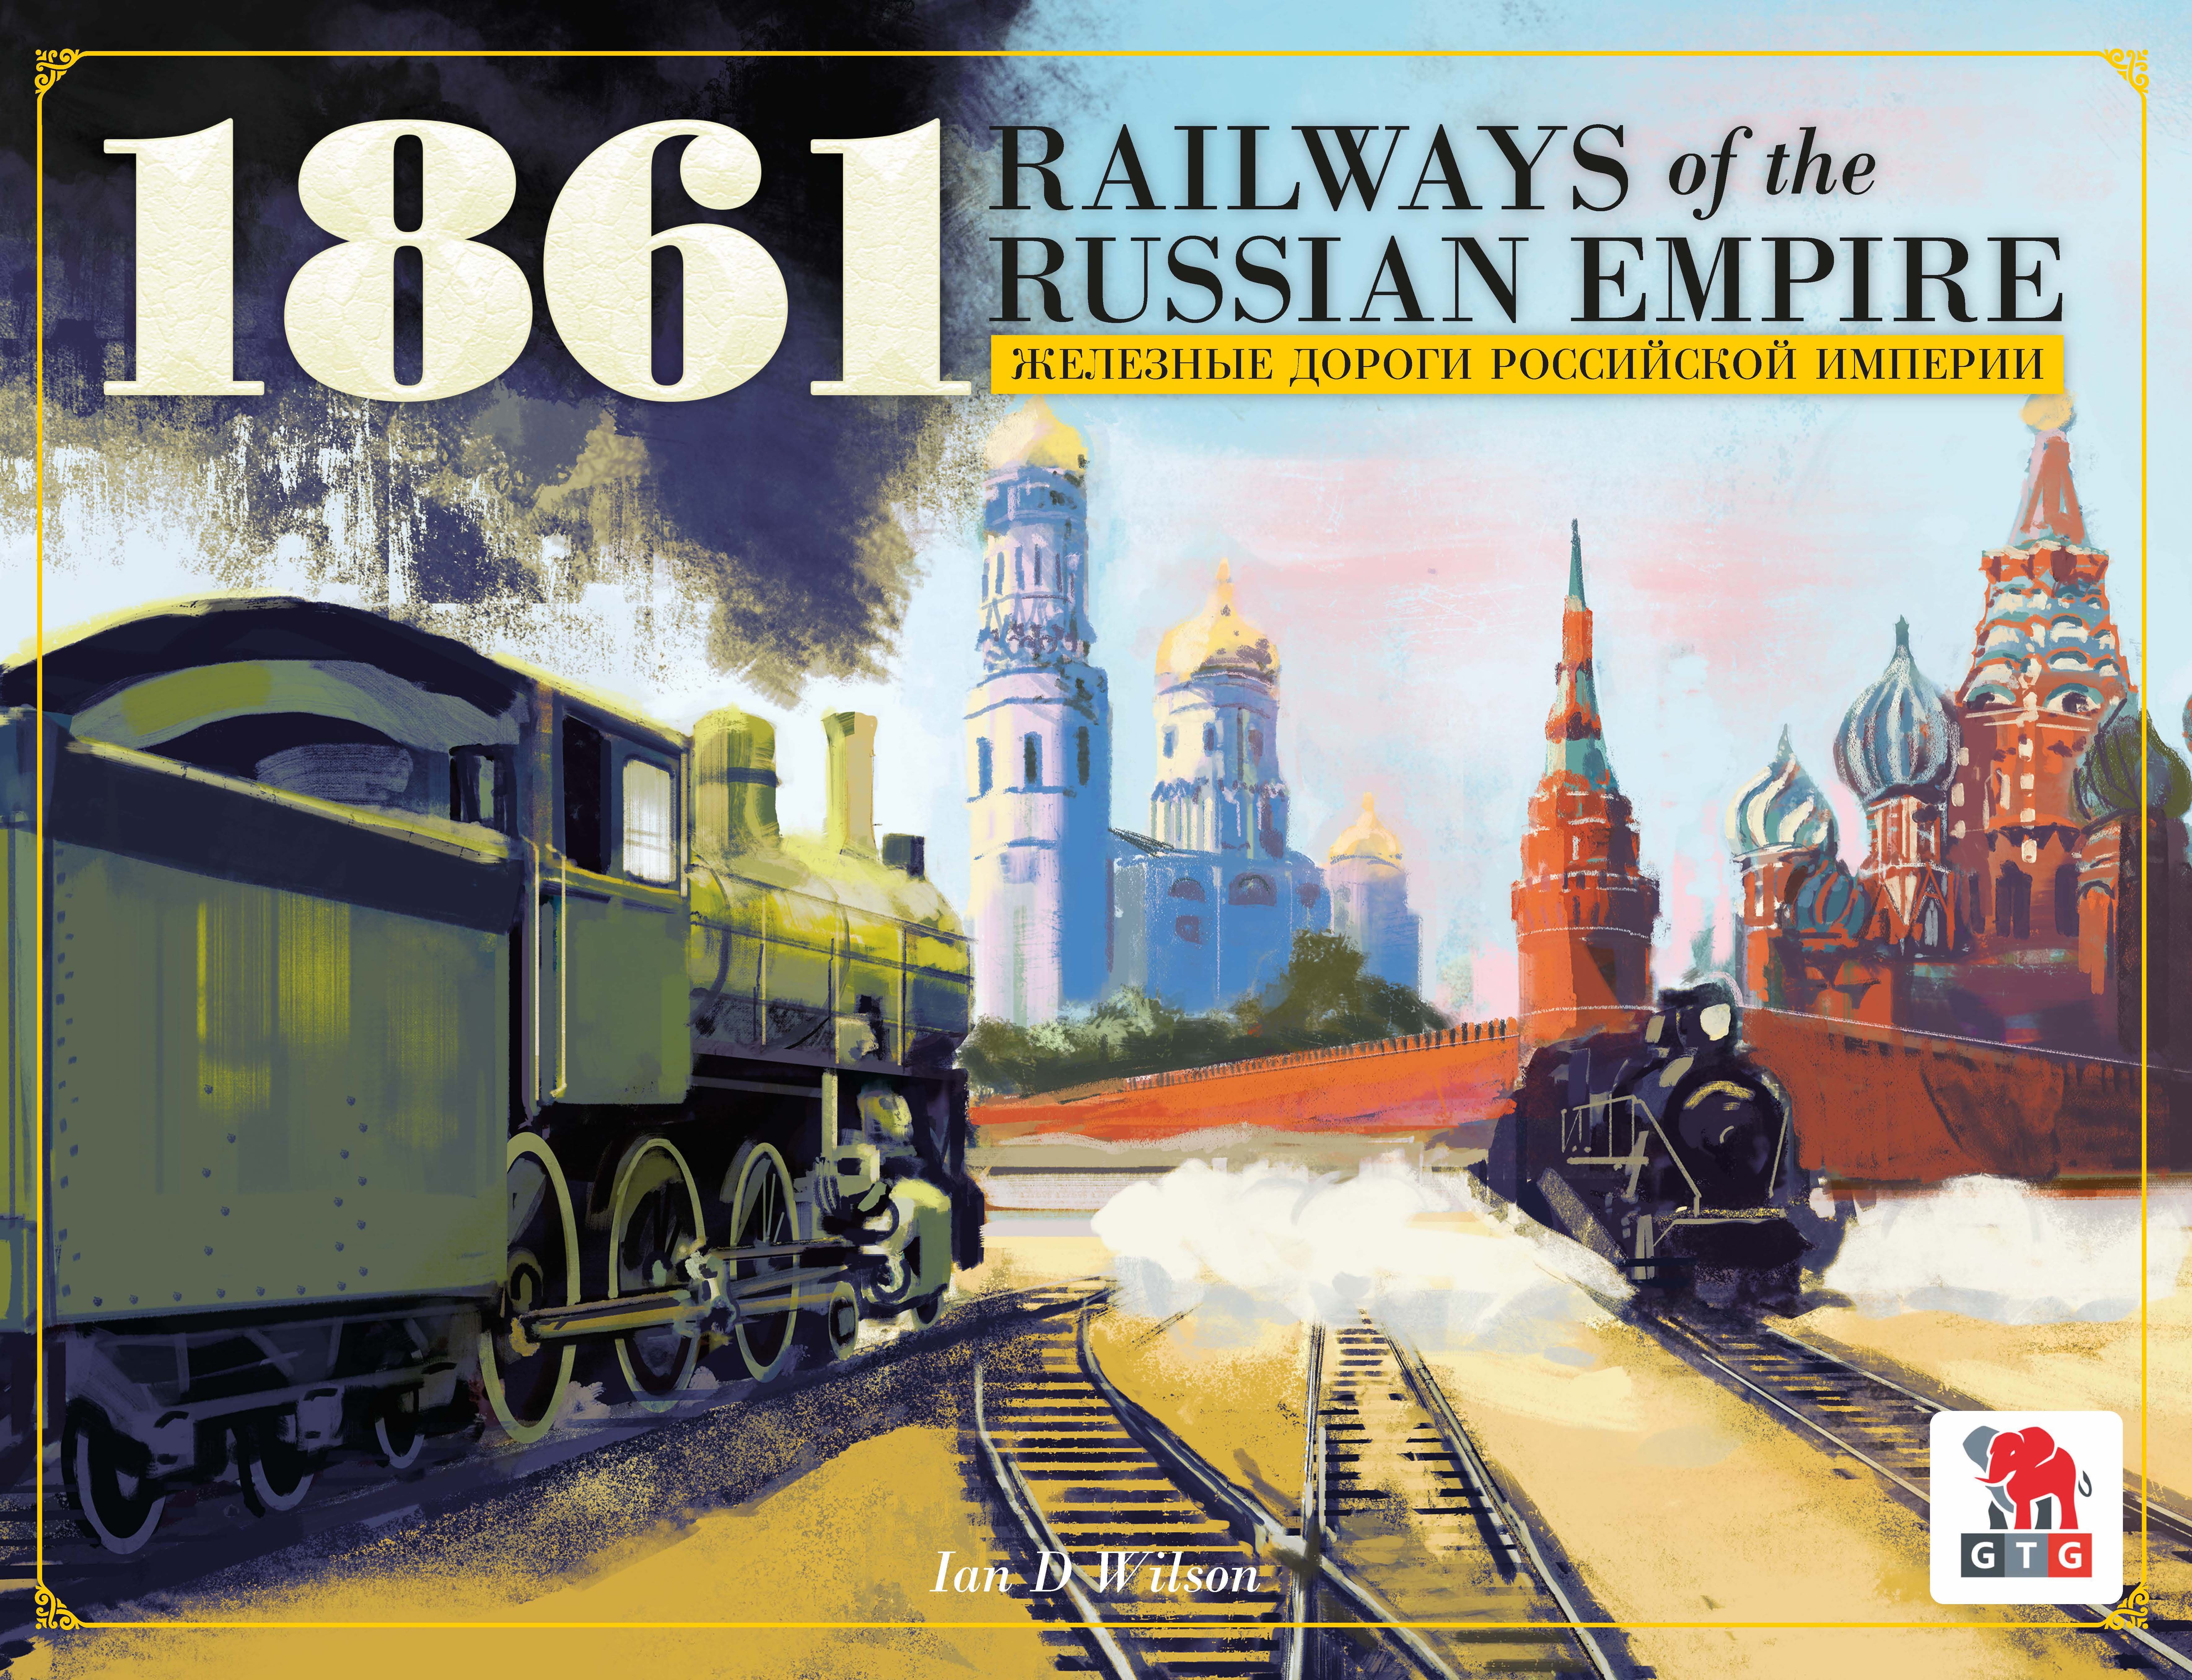 1861: The Railways of the Russian Empire